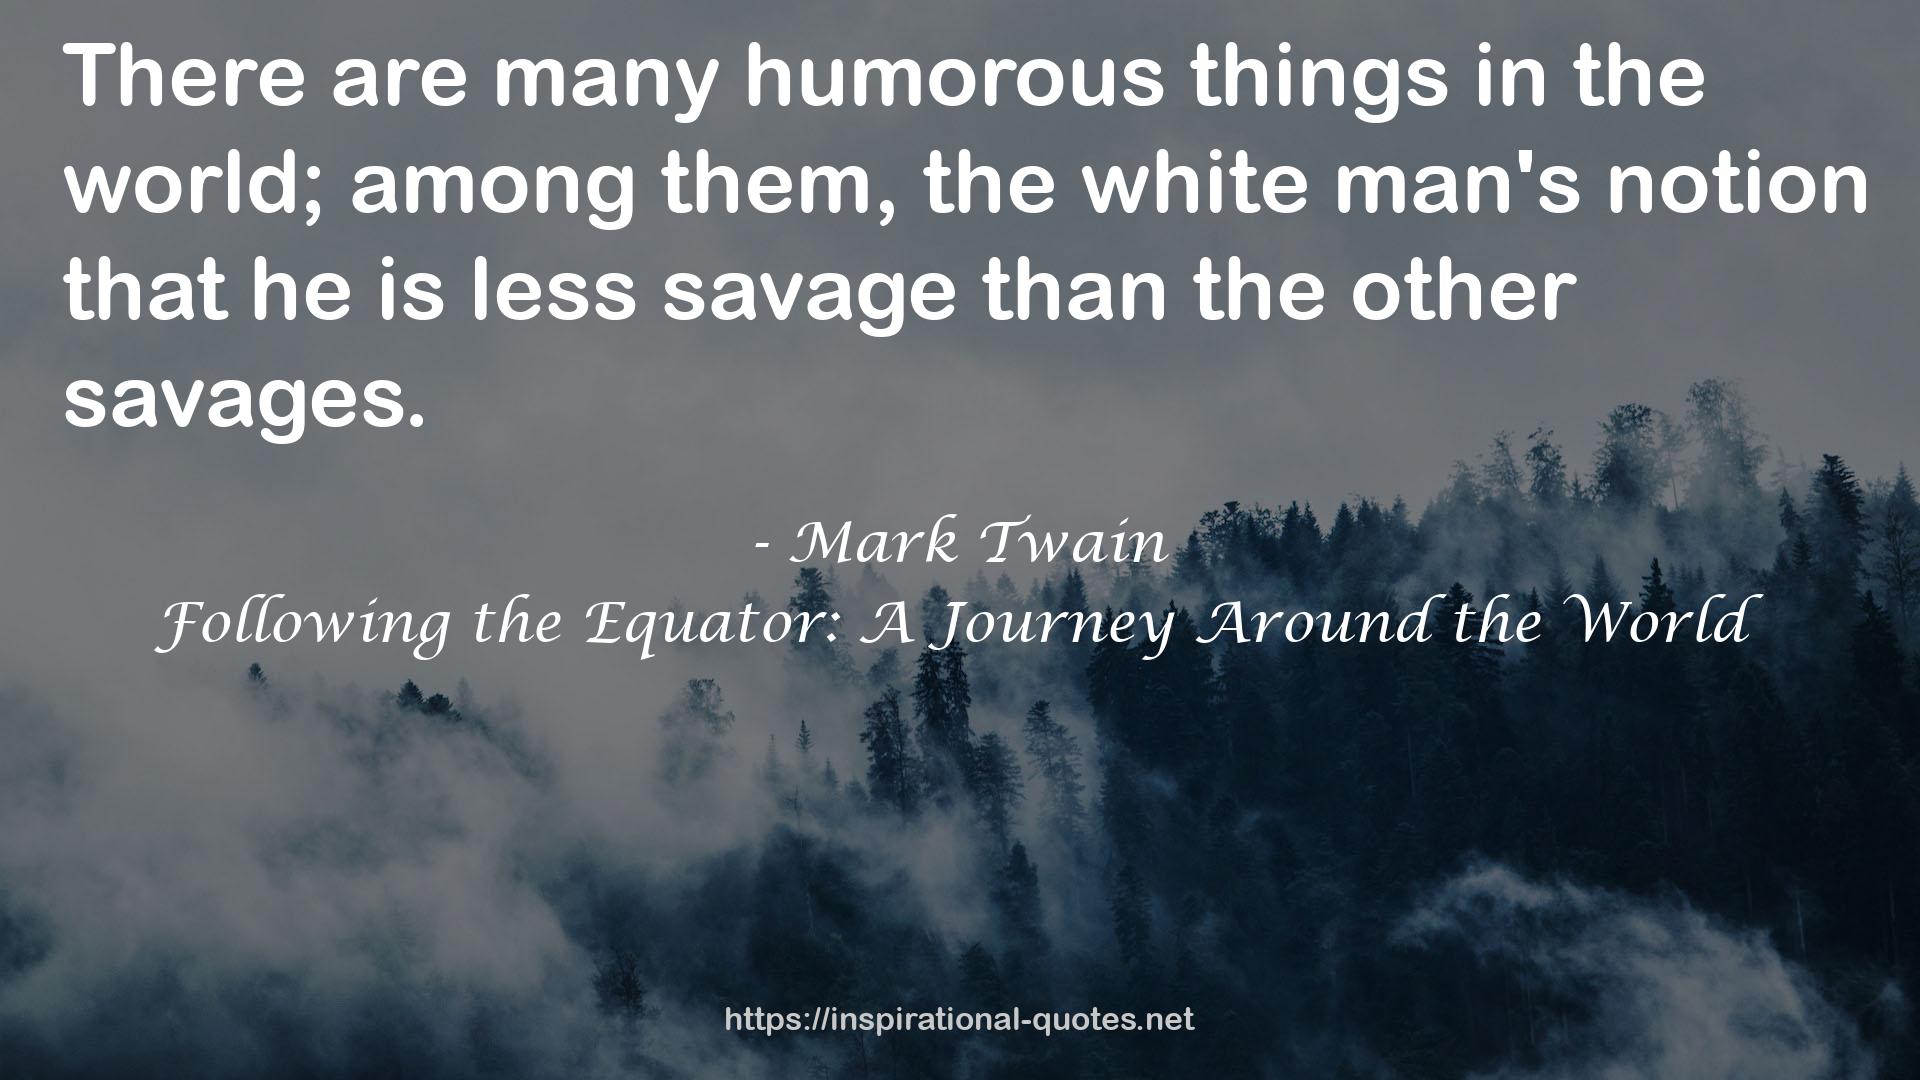 many humorous things  QUOTES